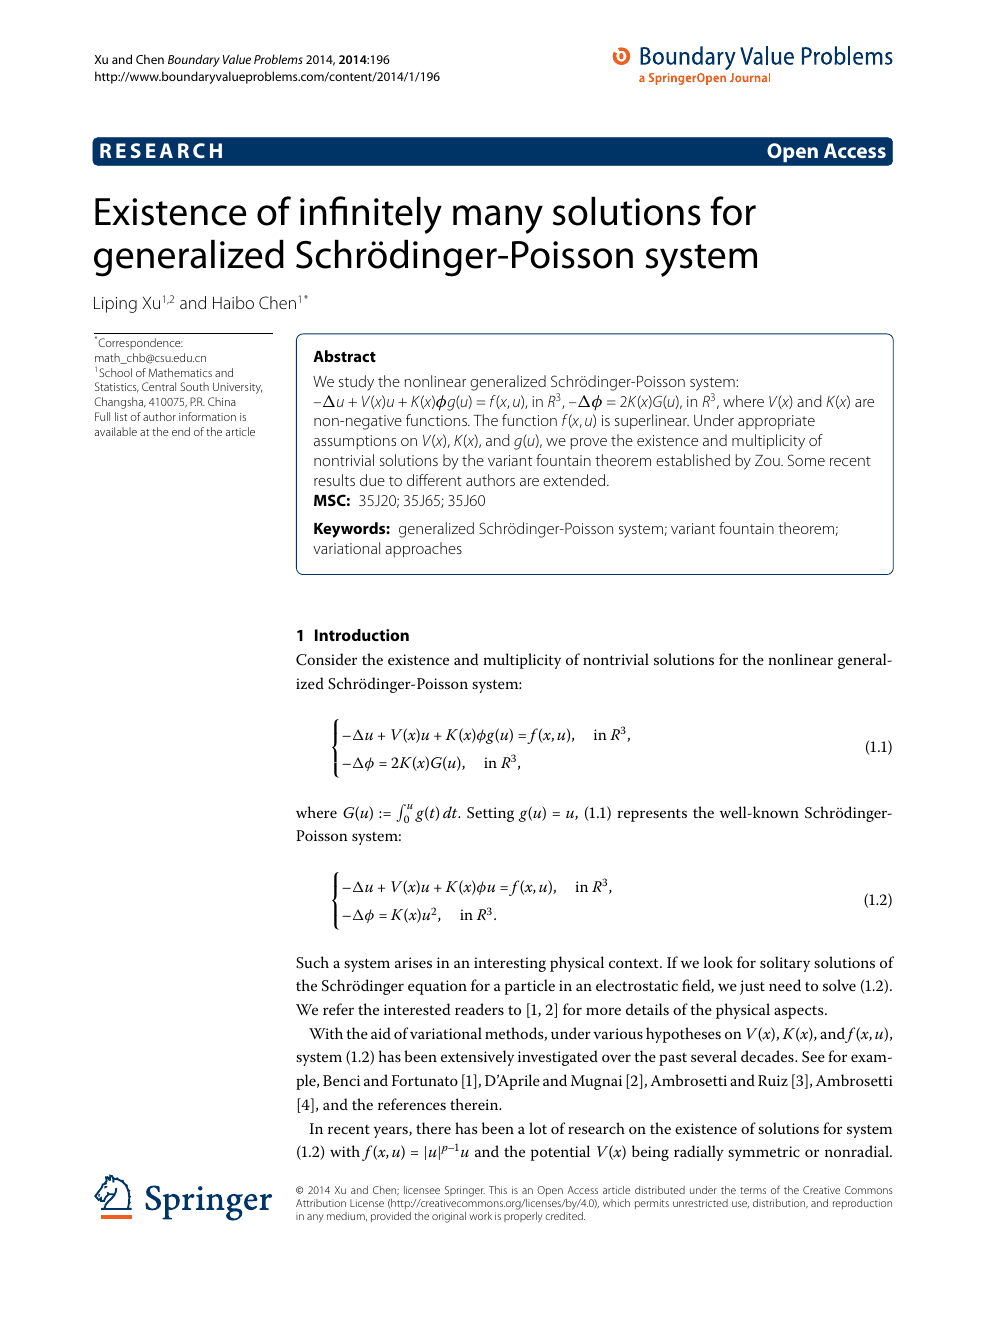 Existence Of Infinitely Many Solutions For Generalized Schrodinger Poisson System Topic Of Research Paper In Mathematics Download Scholarly Article Pdf And Read For Free On Cyberleninka Open Science Hub